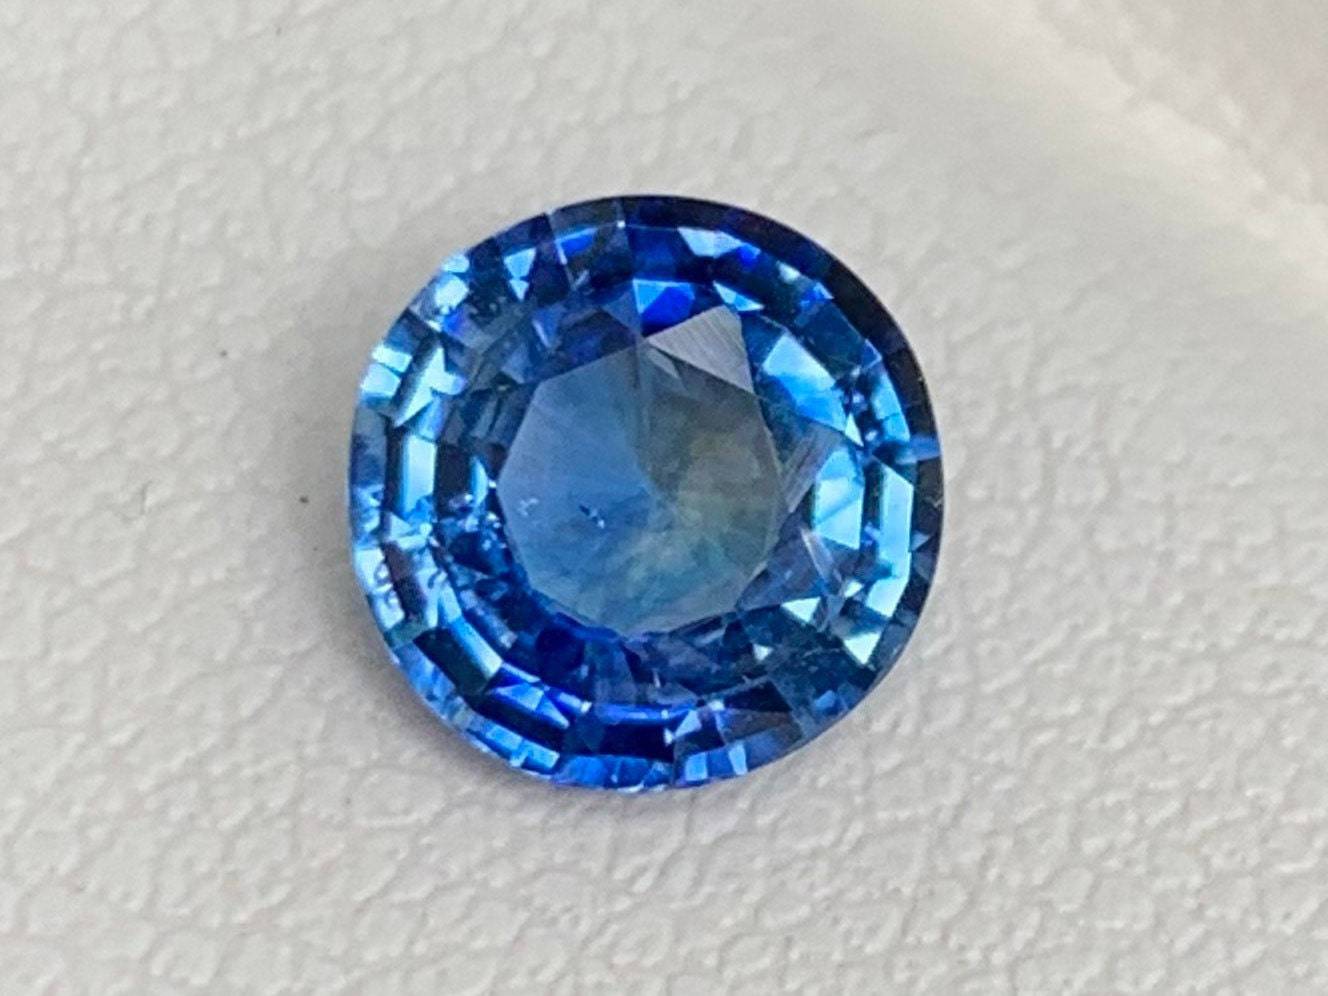 Blue sapphire 1.54 Cts, Natural Cornflower Blue Sapphire, Blue sapphire for Engagement ring, Ceylon Blue Sapphire, A Gift for her - Baza Boutique 